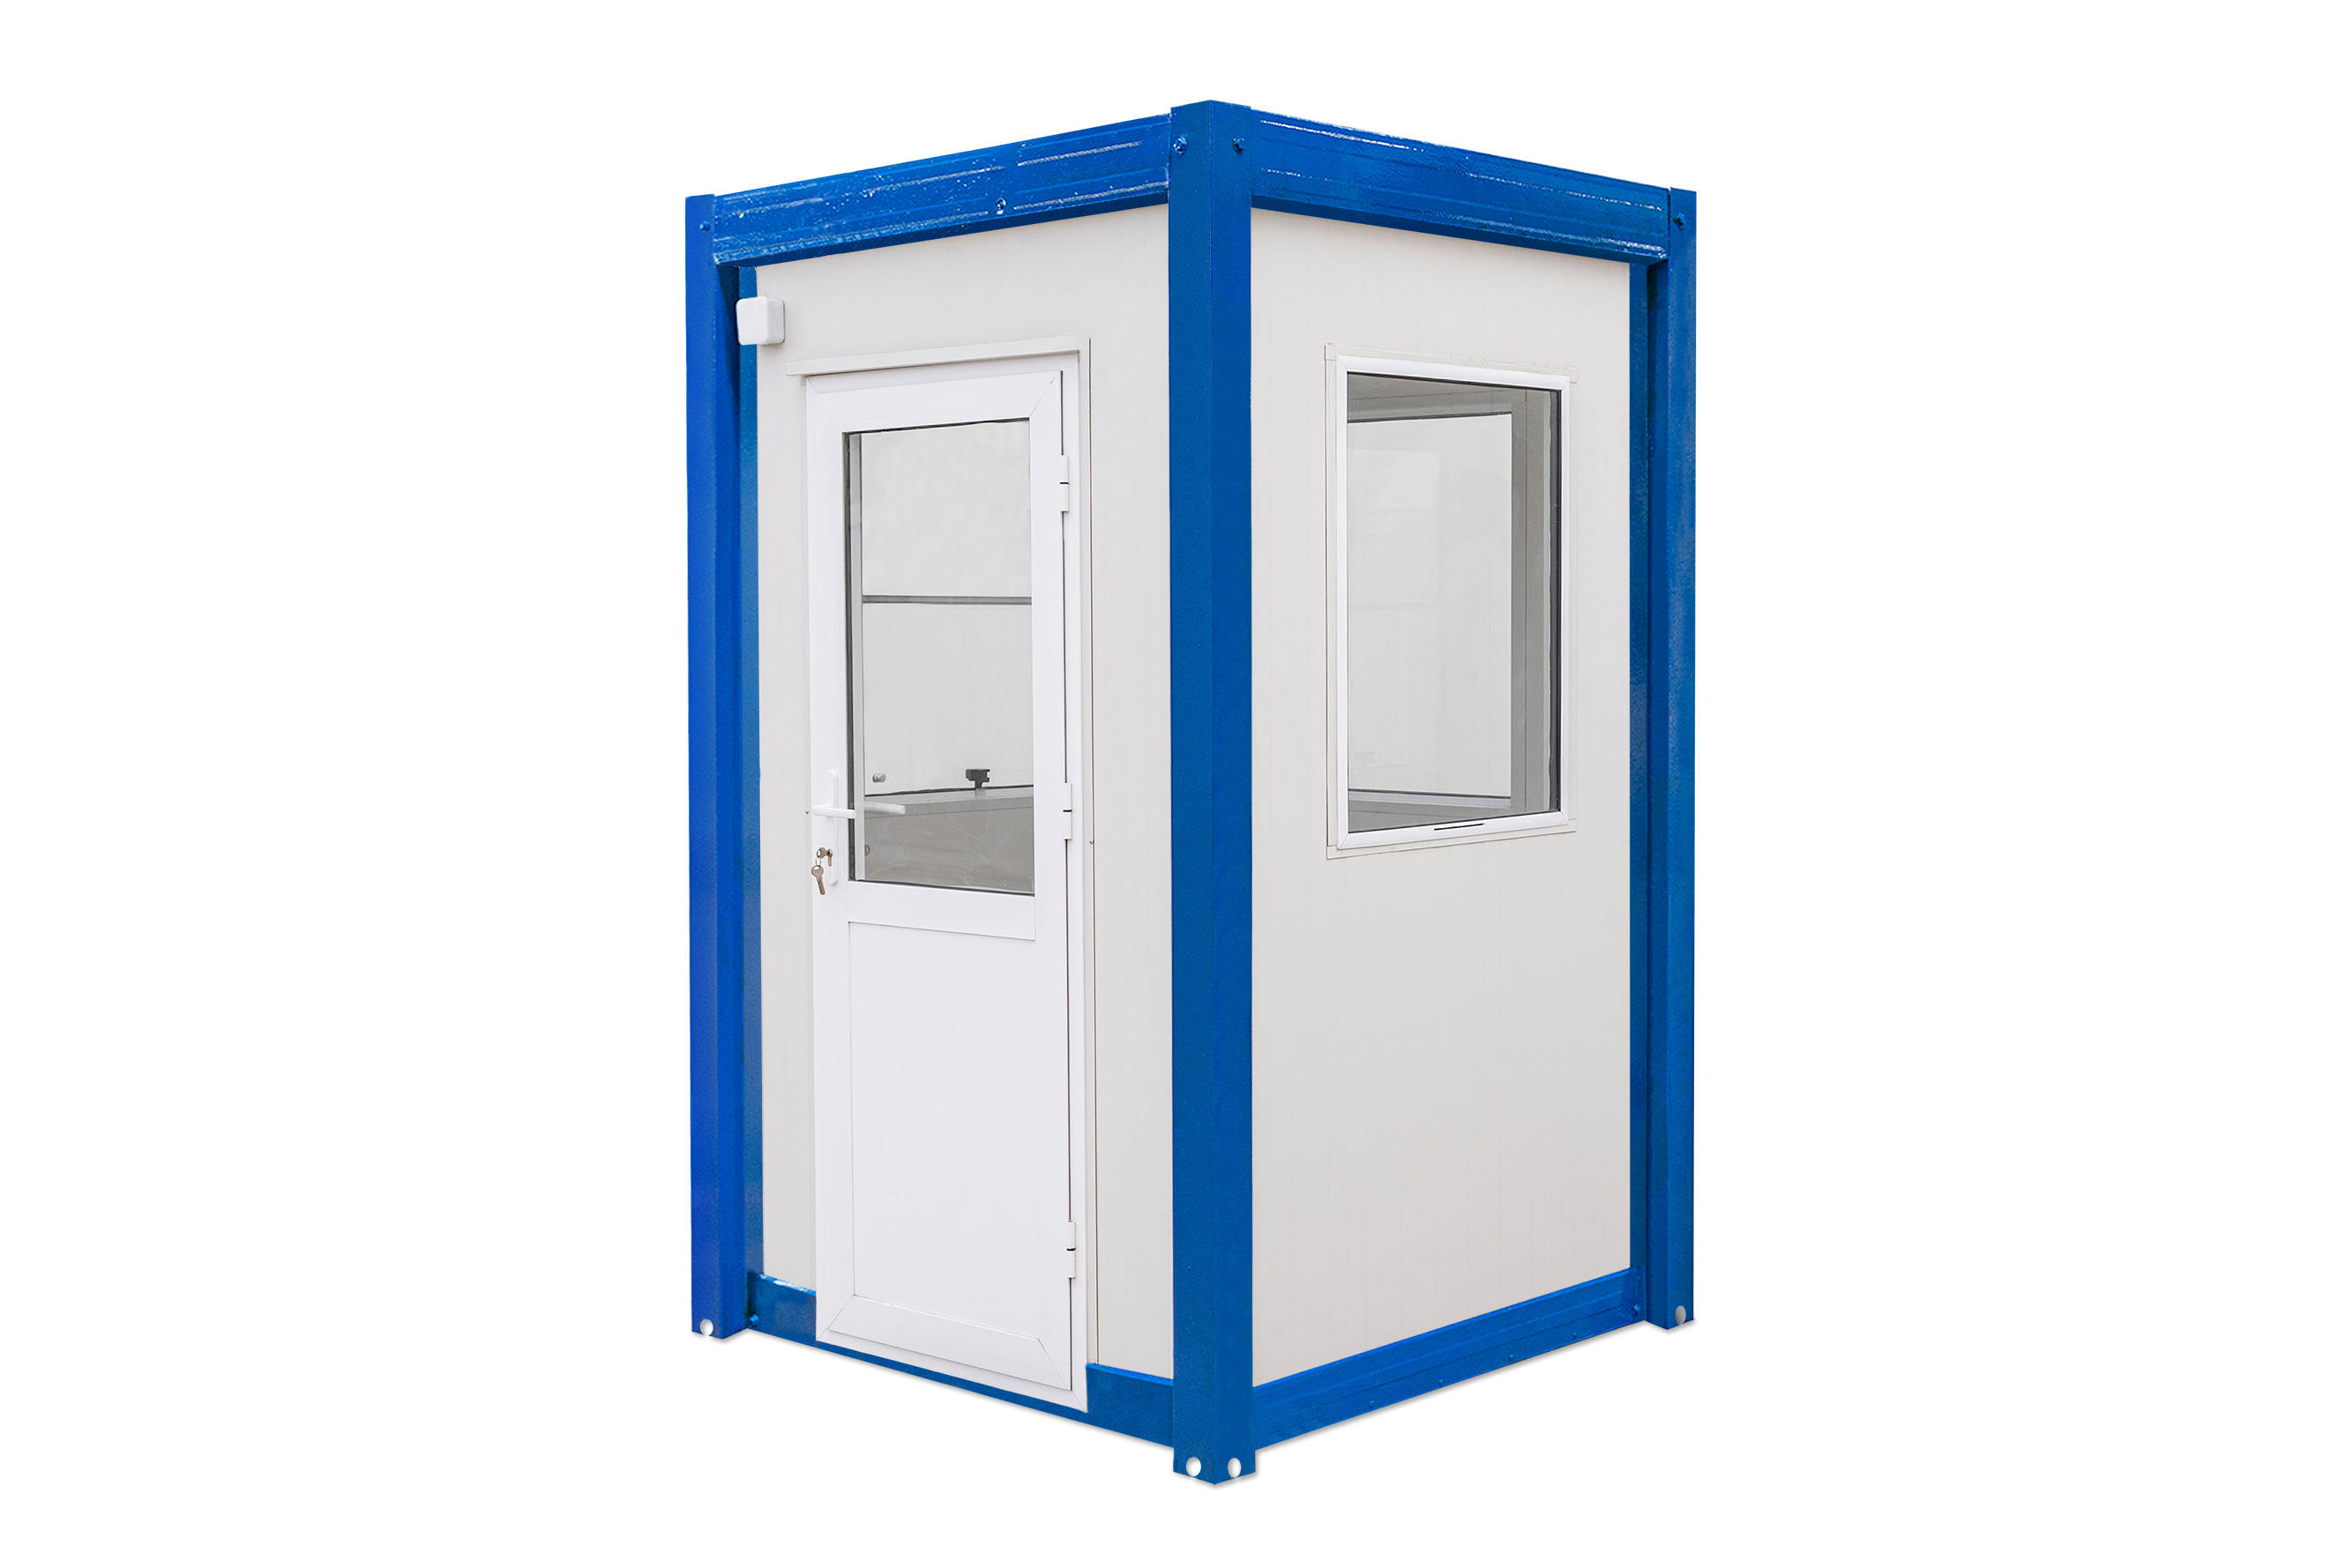 VTS security booths